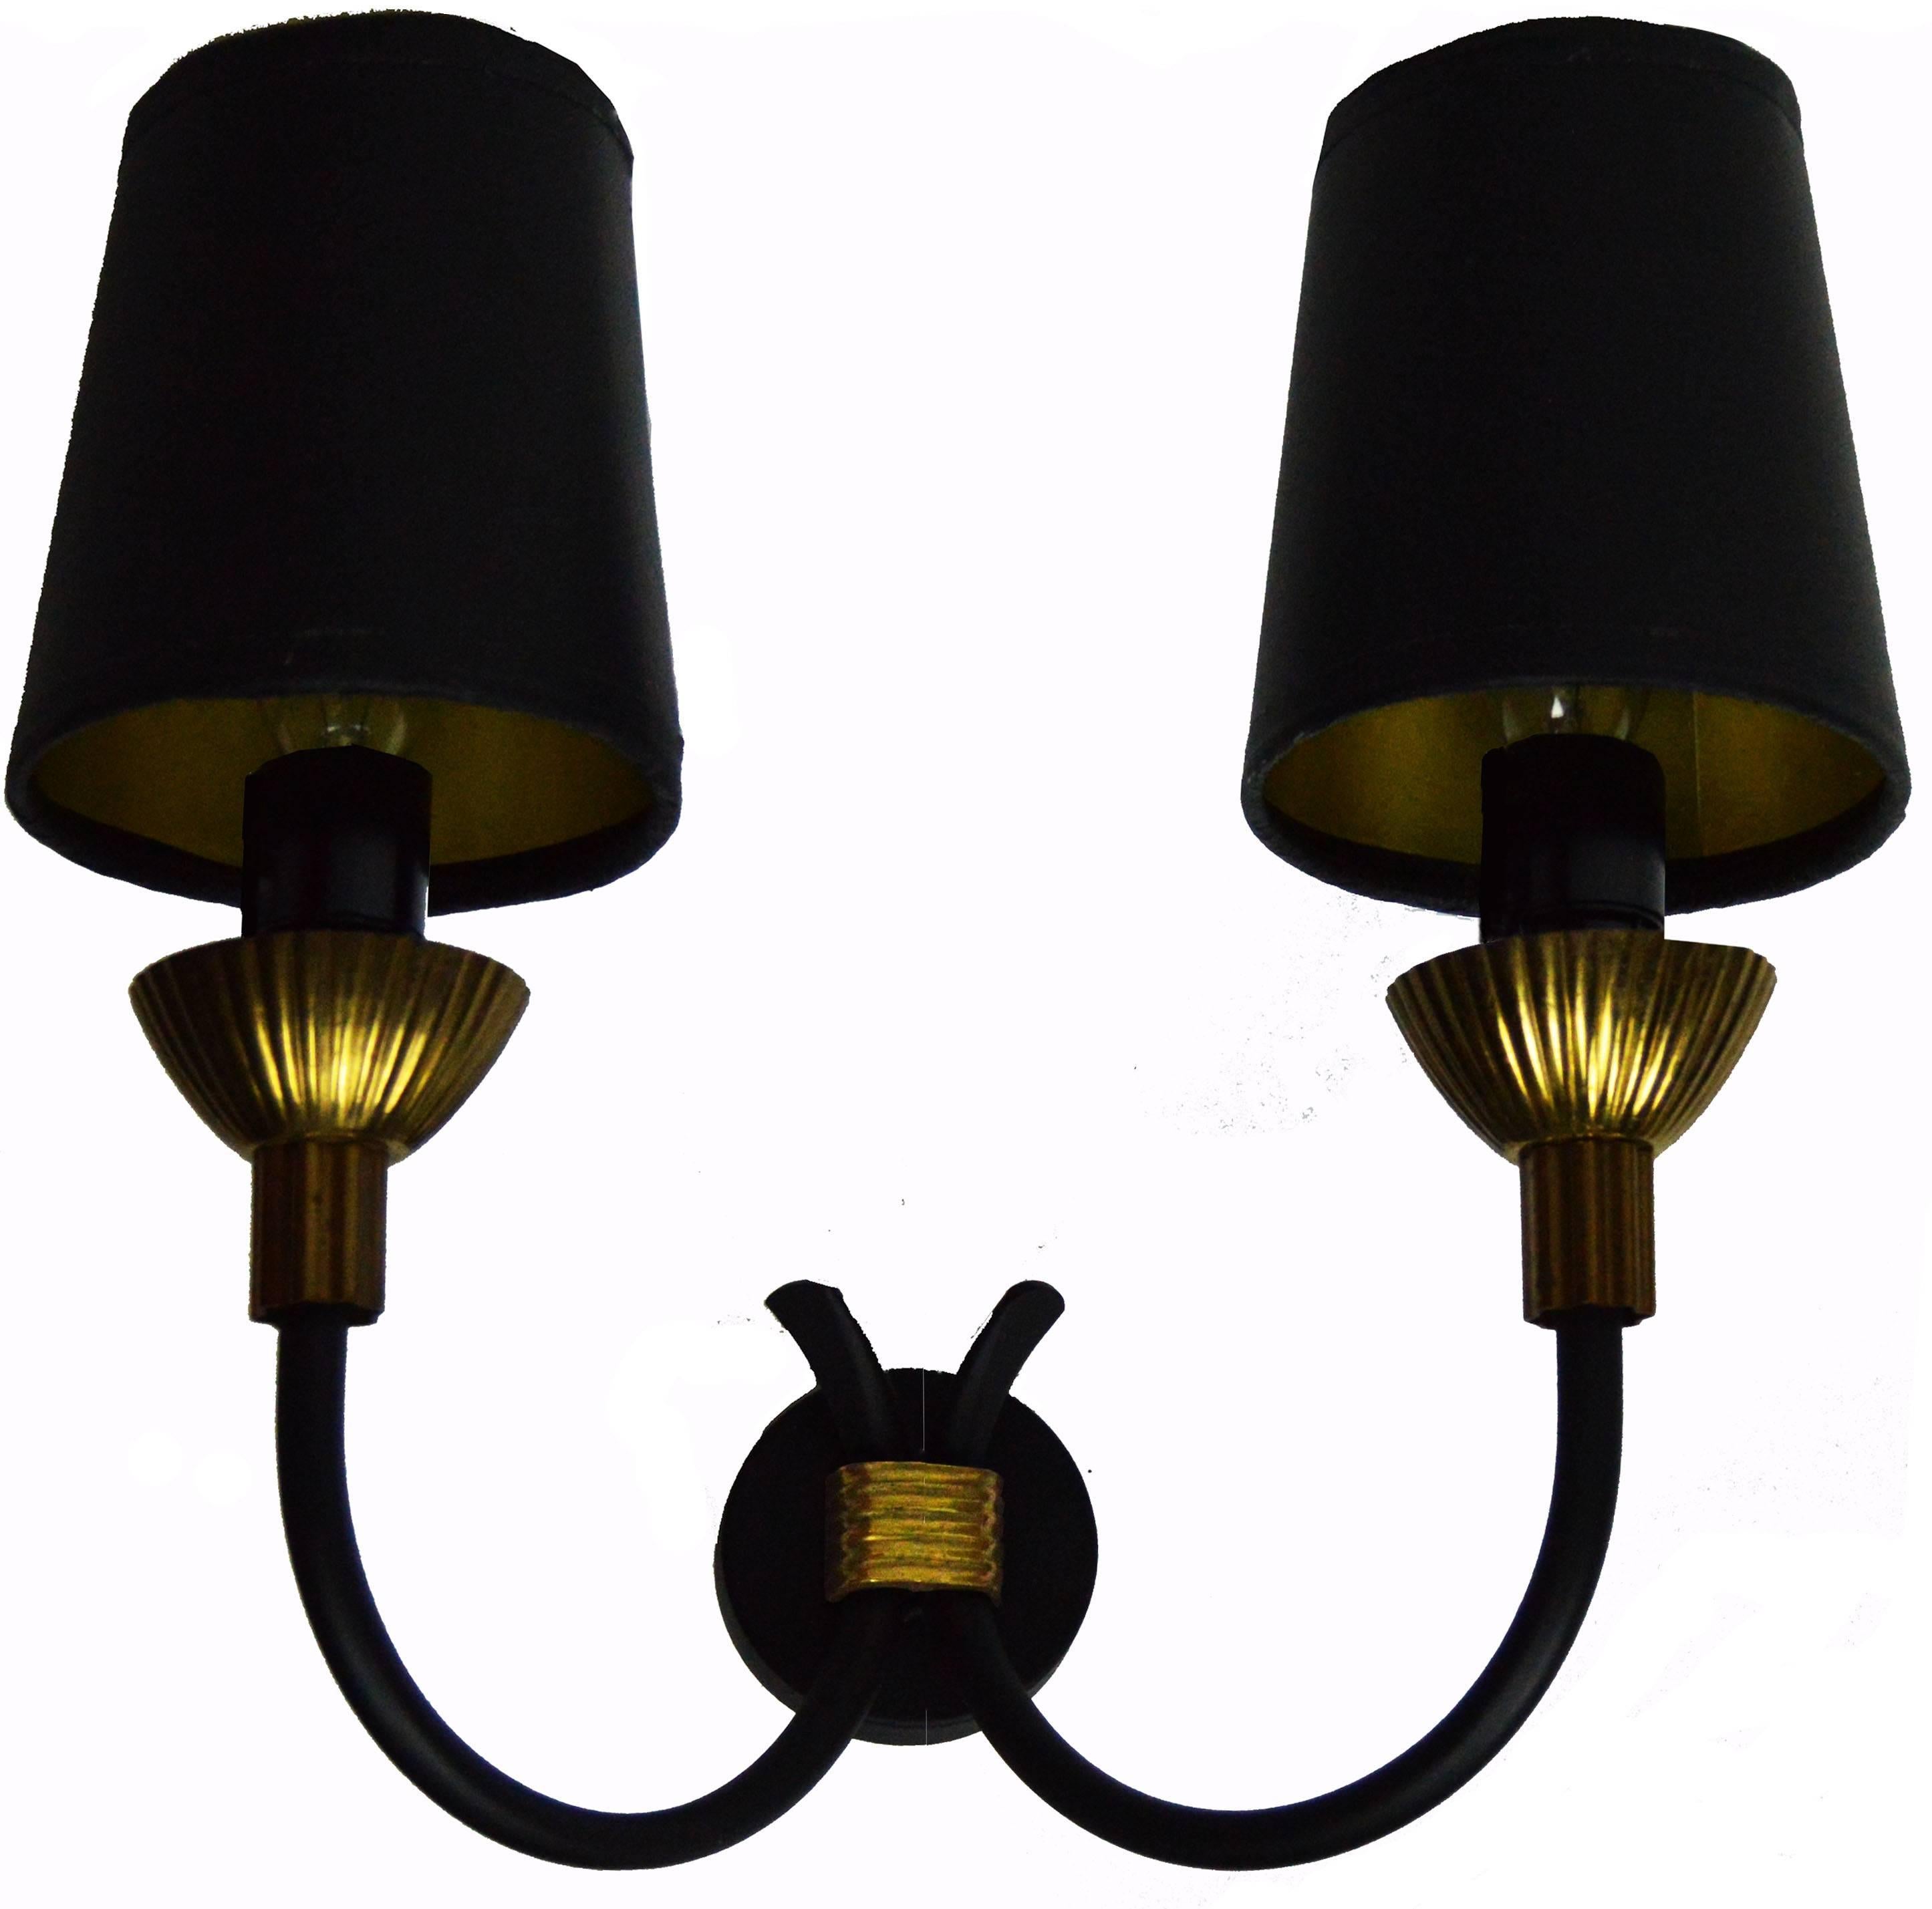 Maison Lunel Sconces Price for one sconce. In Excellent Condition For Sale In Miami, FL